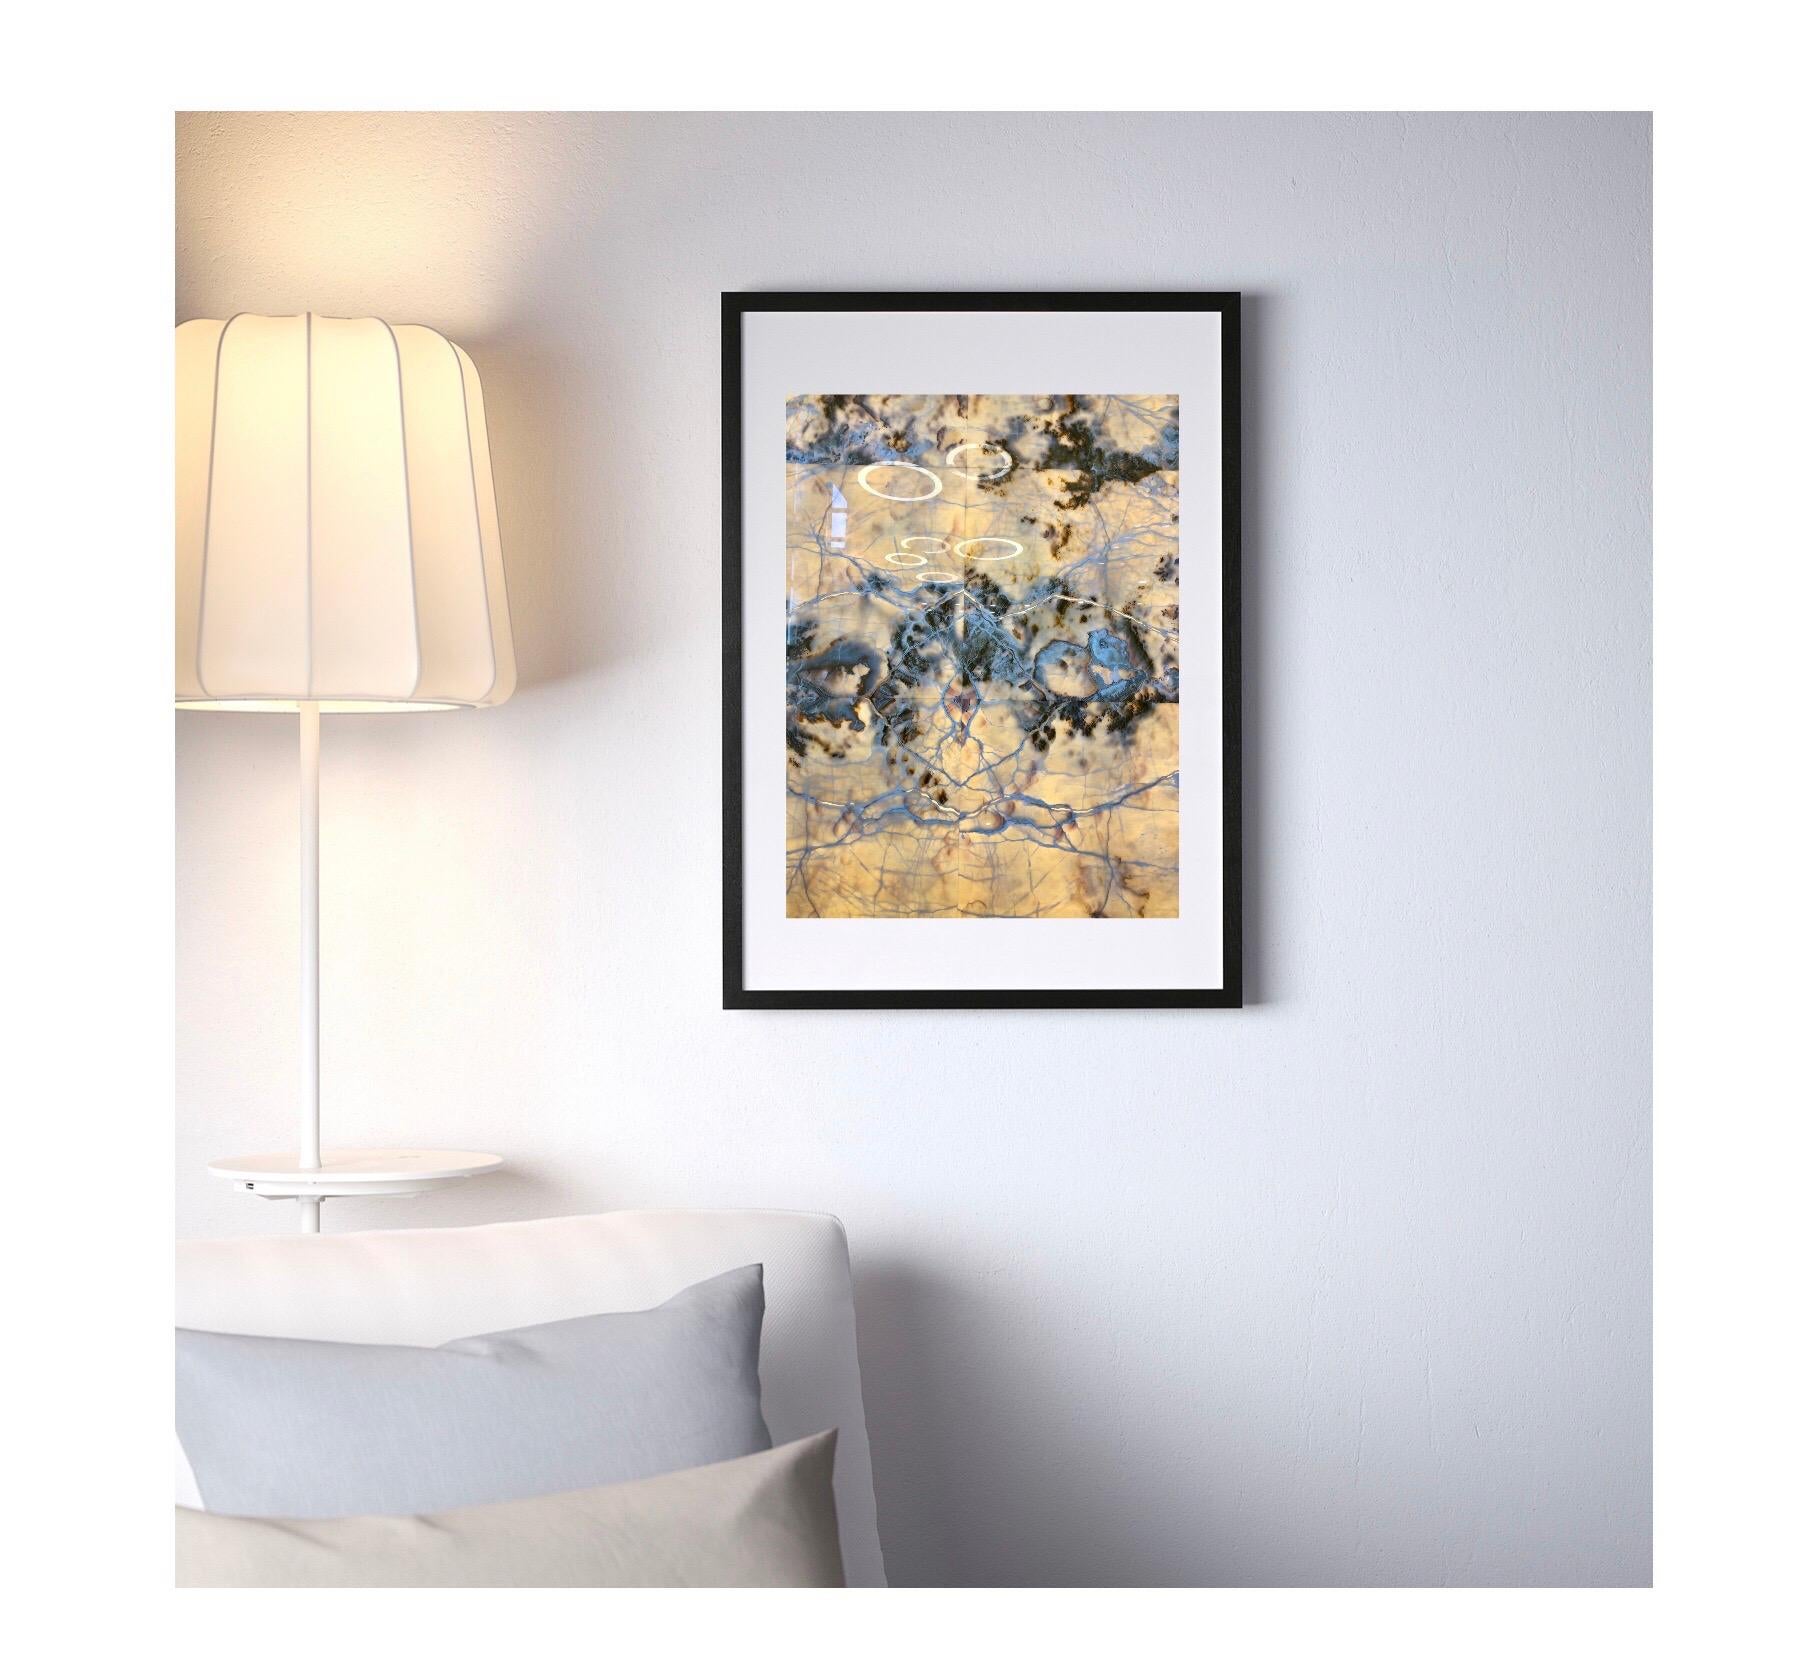 Photography, fine art print. Reminiscence on the Onyx Wall at the Villa Tugendhat. Done somewhere in Slovakia. Could be delivered im different sizes. SalamonArt certificate will be delivered. Signed.